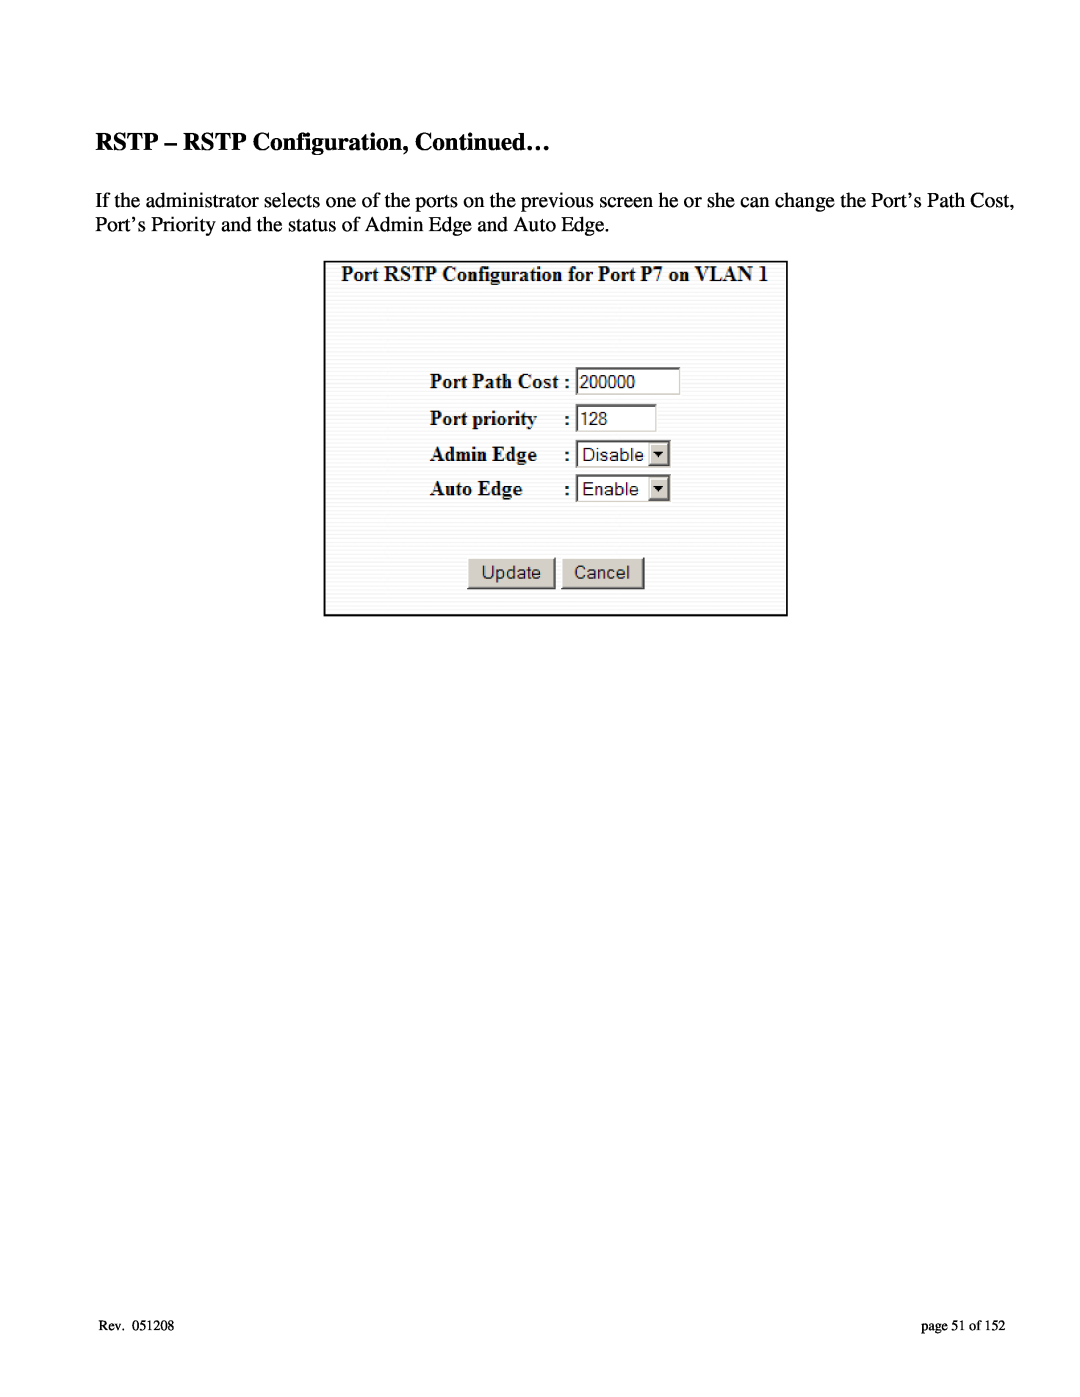 Gigabyte 7014 user manual RSTP - RSTP Configuration, Continued…, page 51 of 